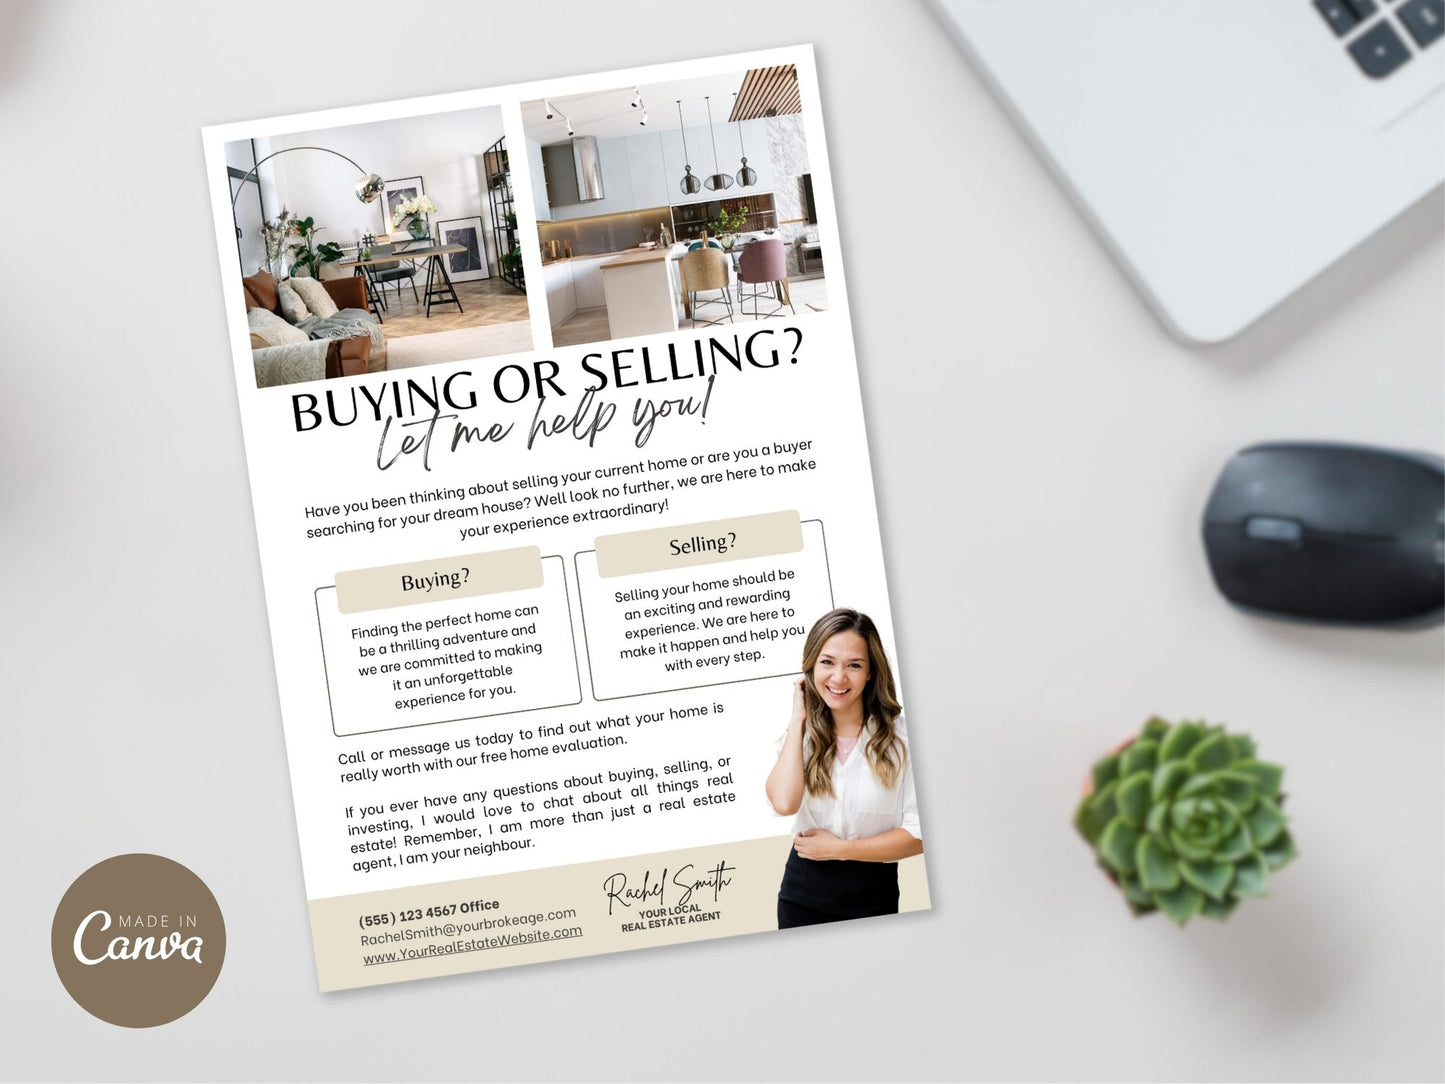 Buying or Selling Real Estate Letter Vol 03 - Professionally designed real estate letter template for impactful communication.